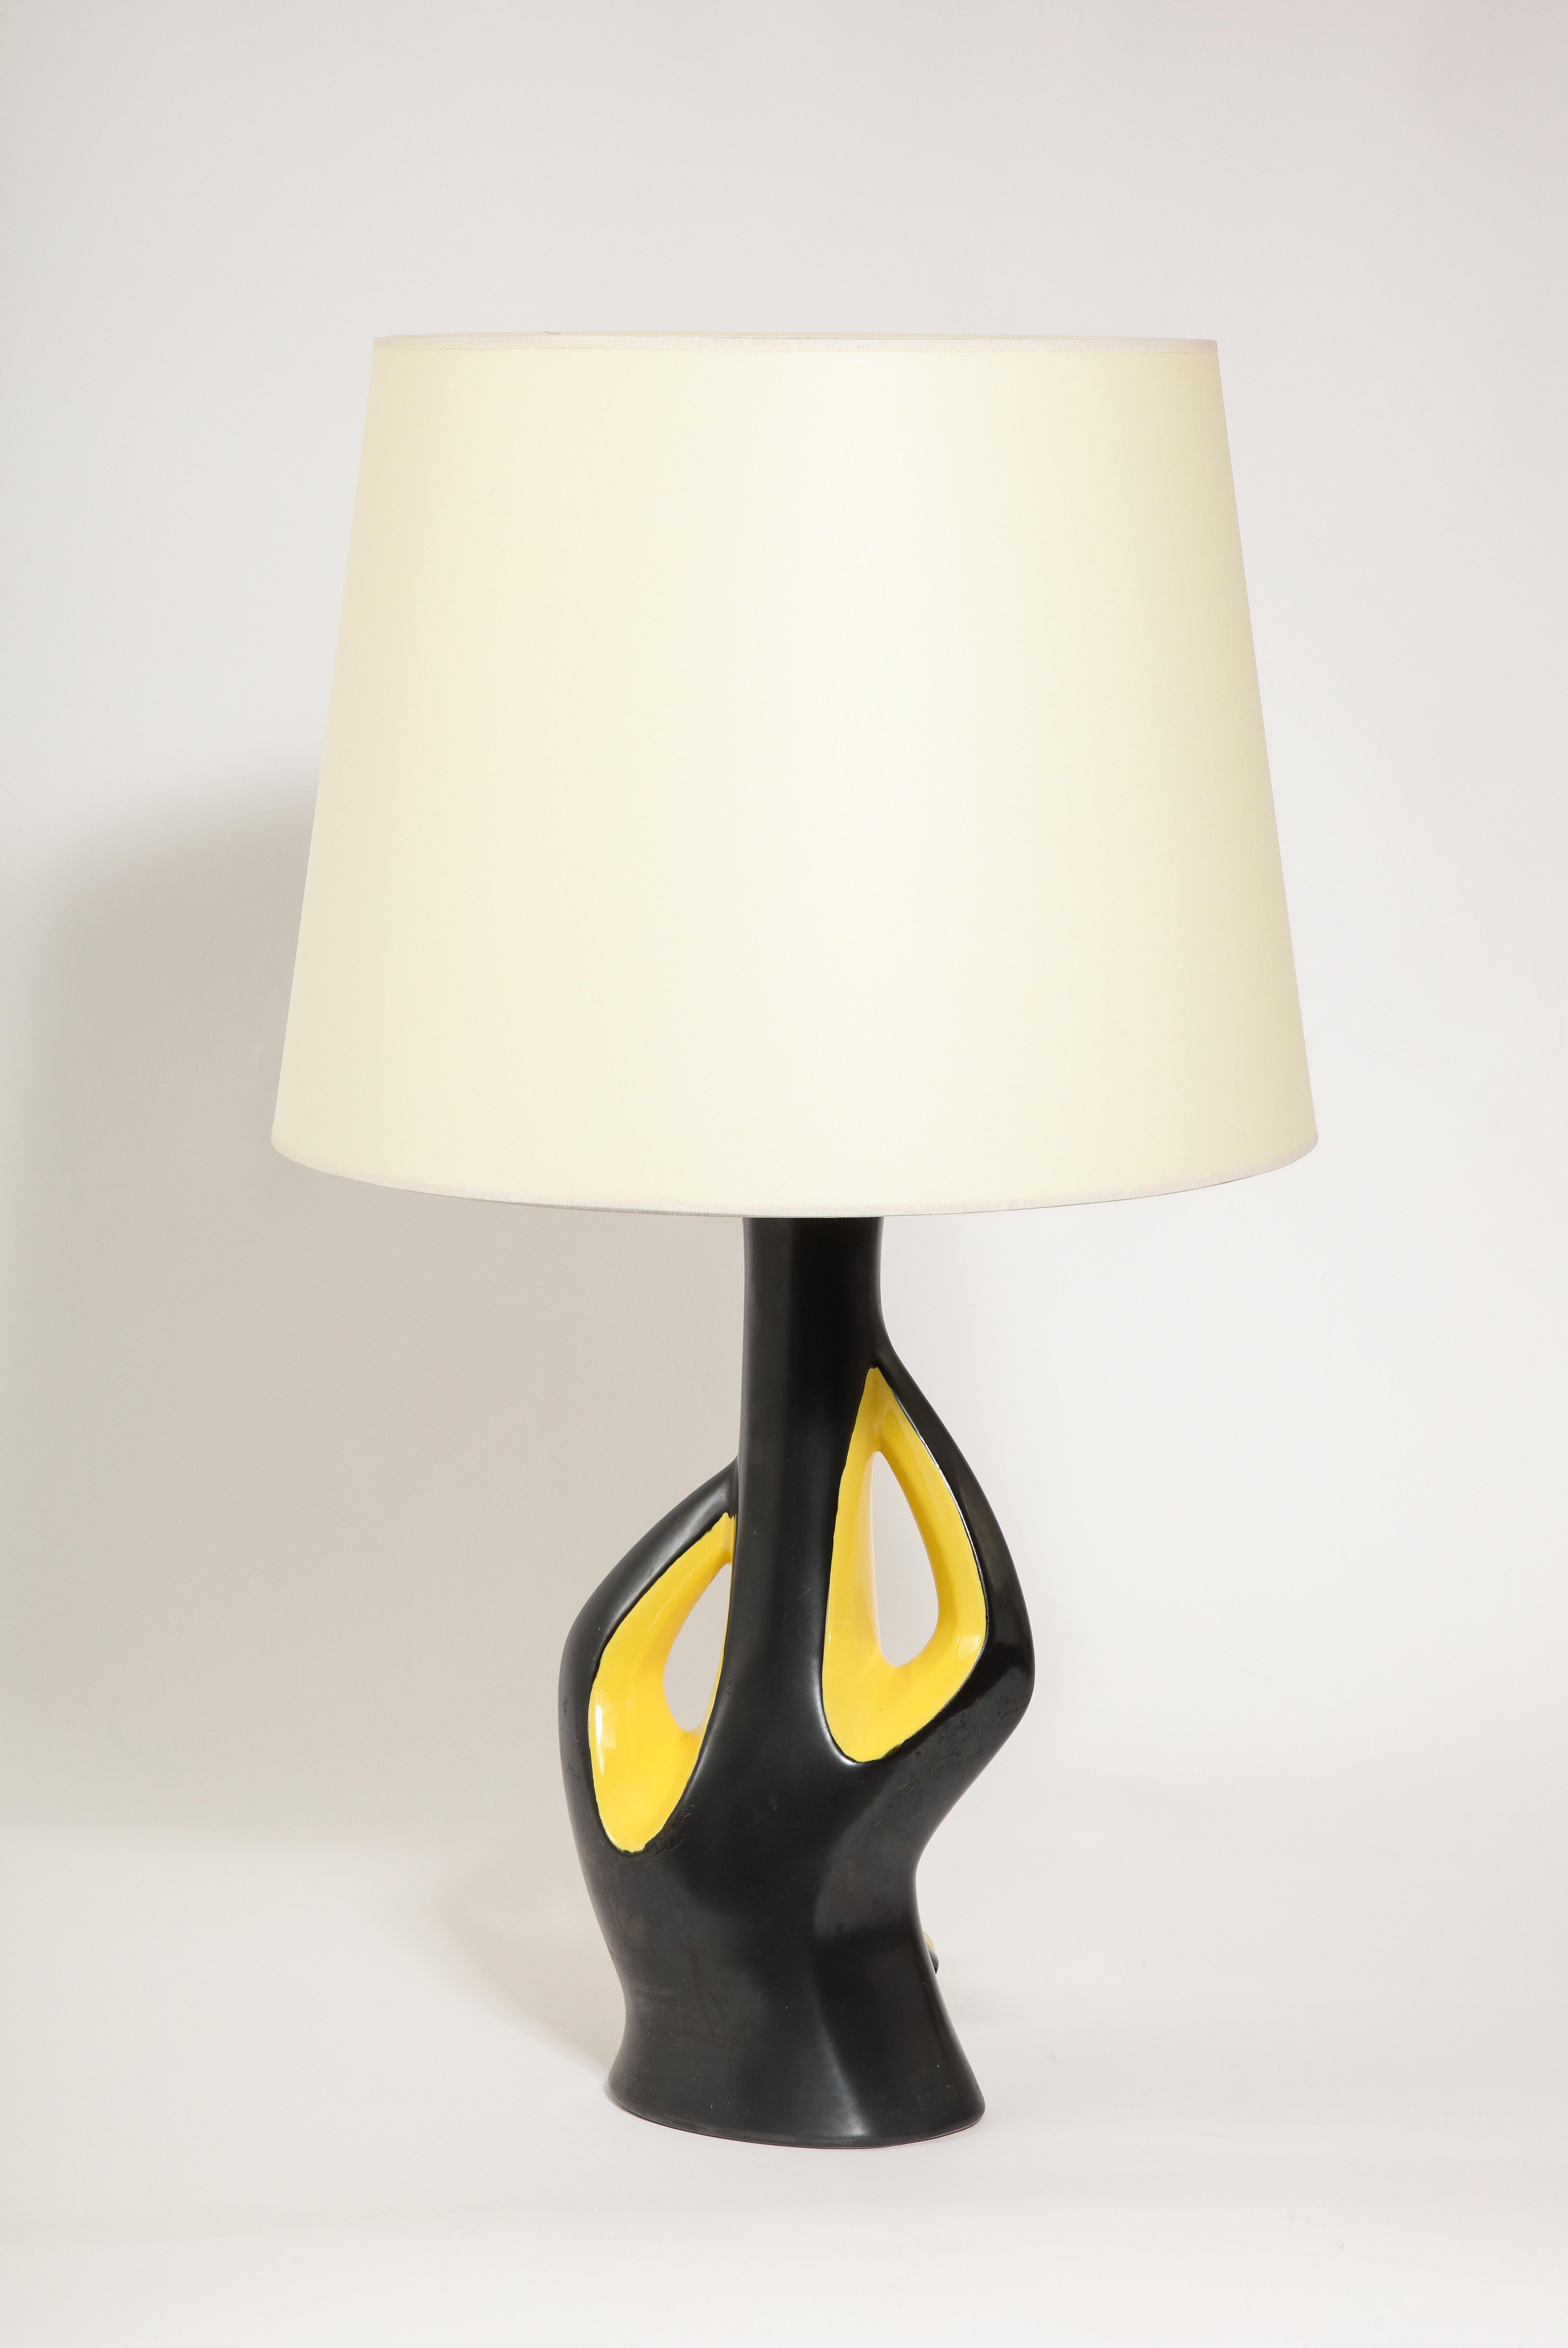 Mid-Century Modern Large Elchinger Two-Tone Yellow & Black Ceramic Table Lamp, France 1950's For Sale